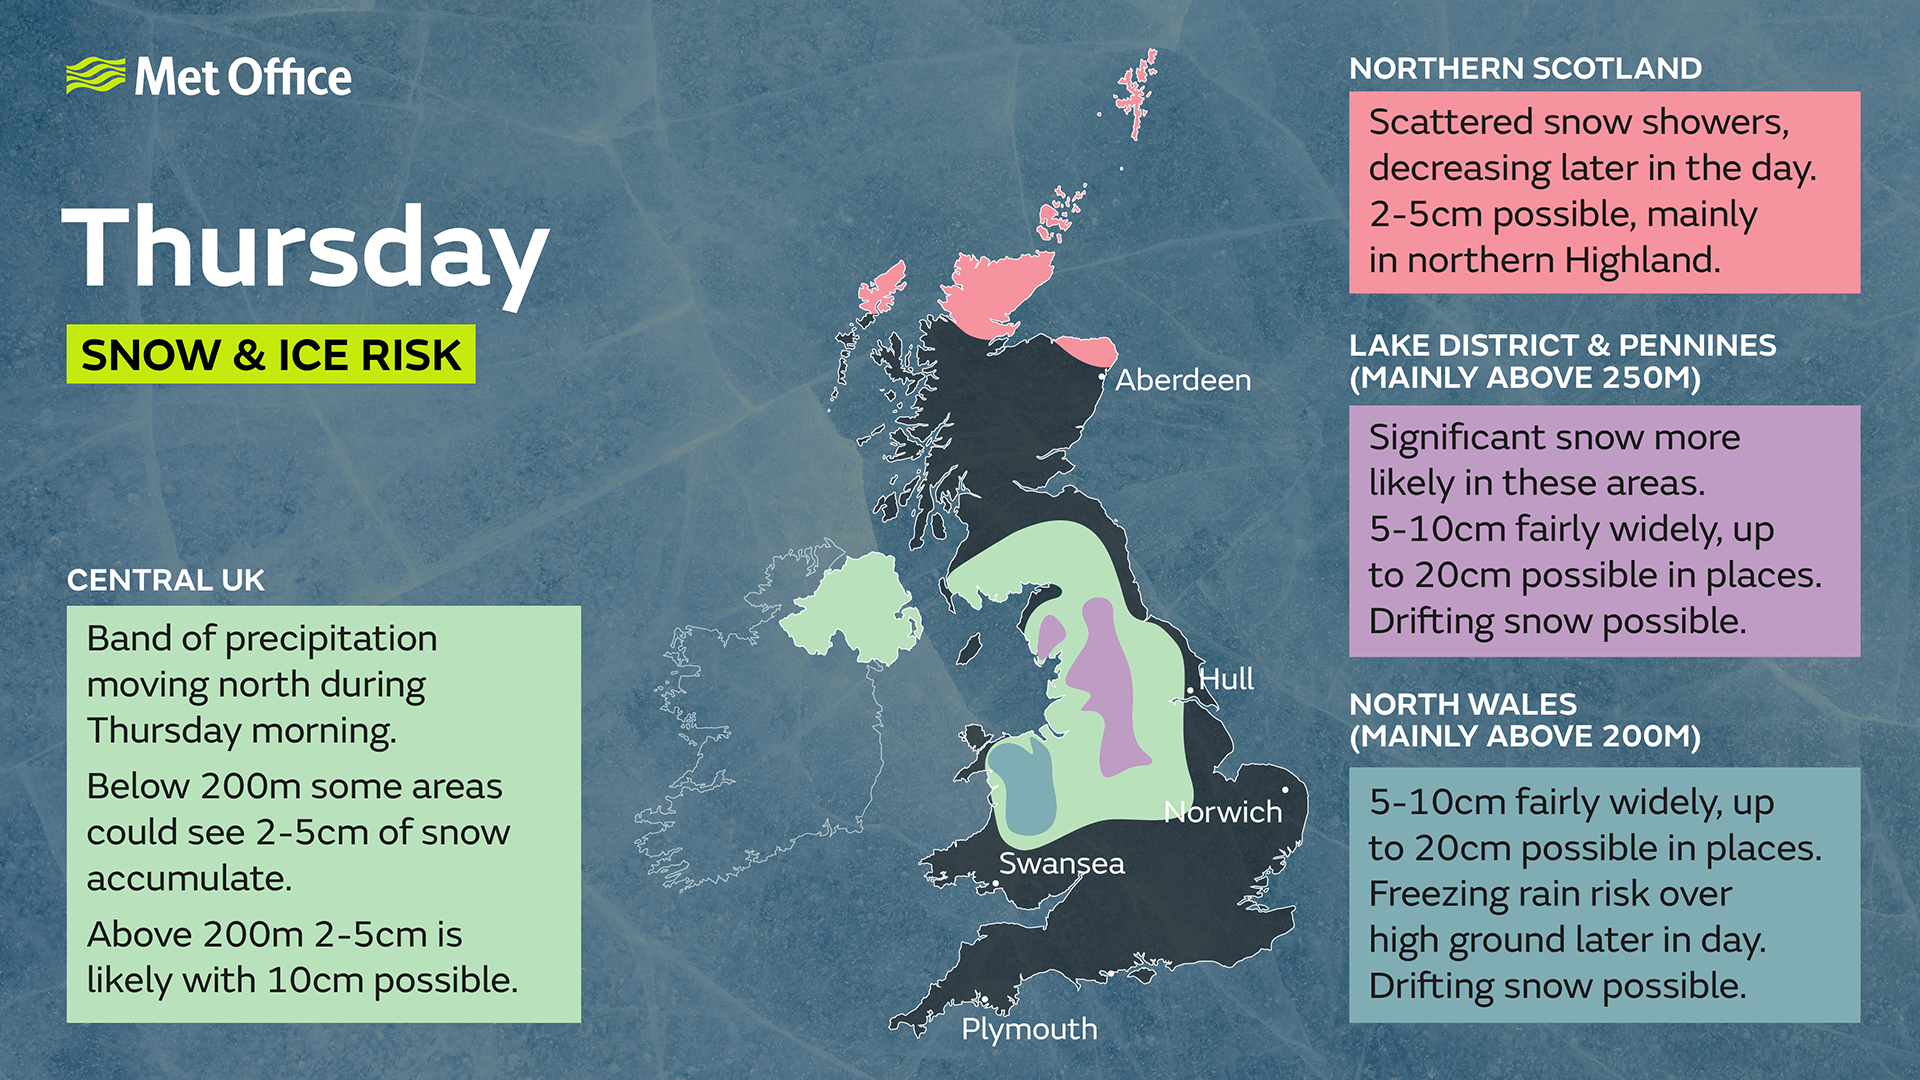 Met Office map shows snow and ice risk on Thursday